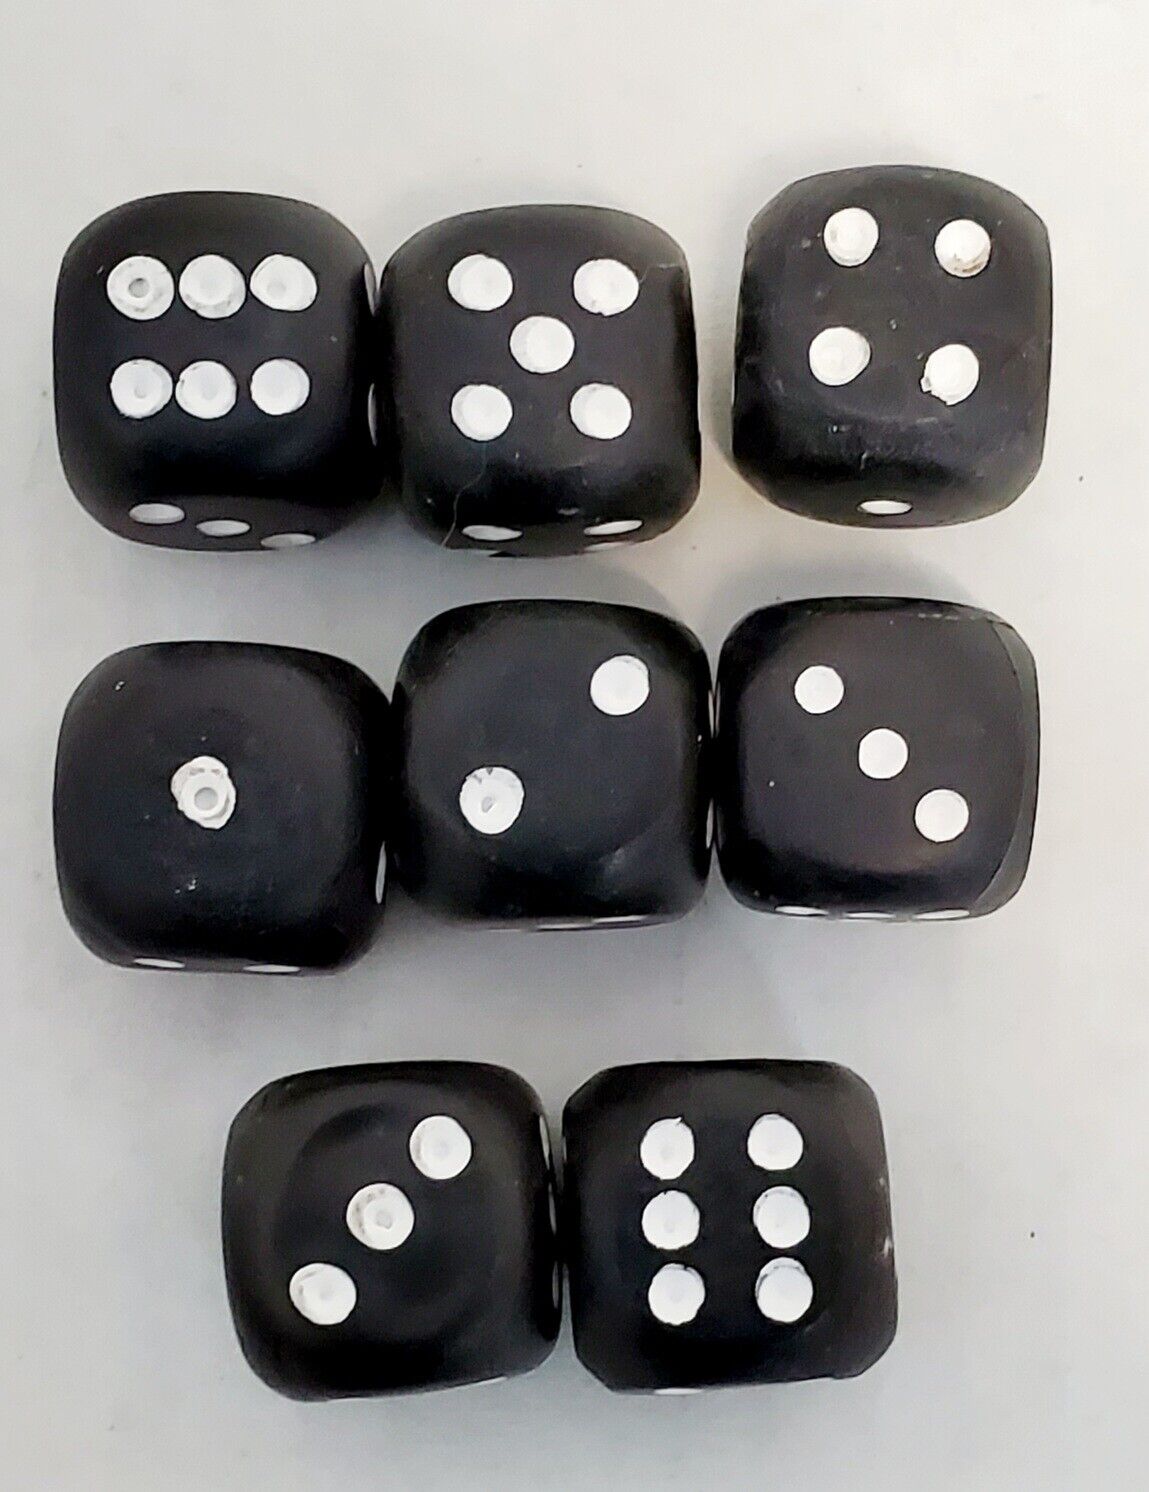 Loaded Dice Set of 8 - Throw Any Number You Choose With Almost 100% Accuracy